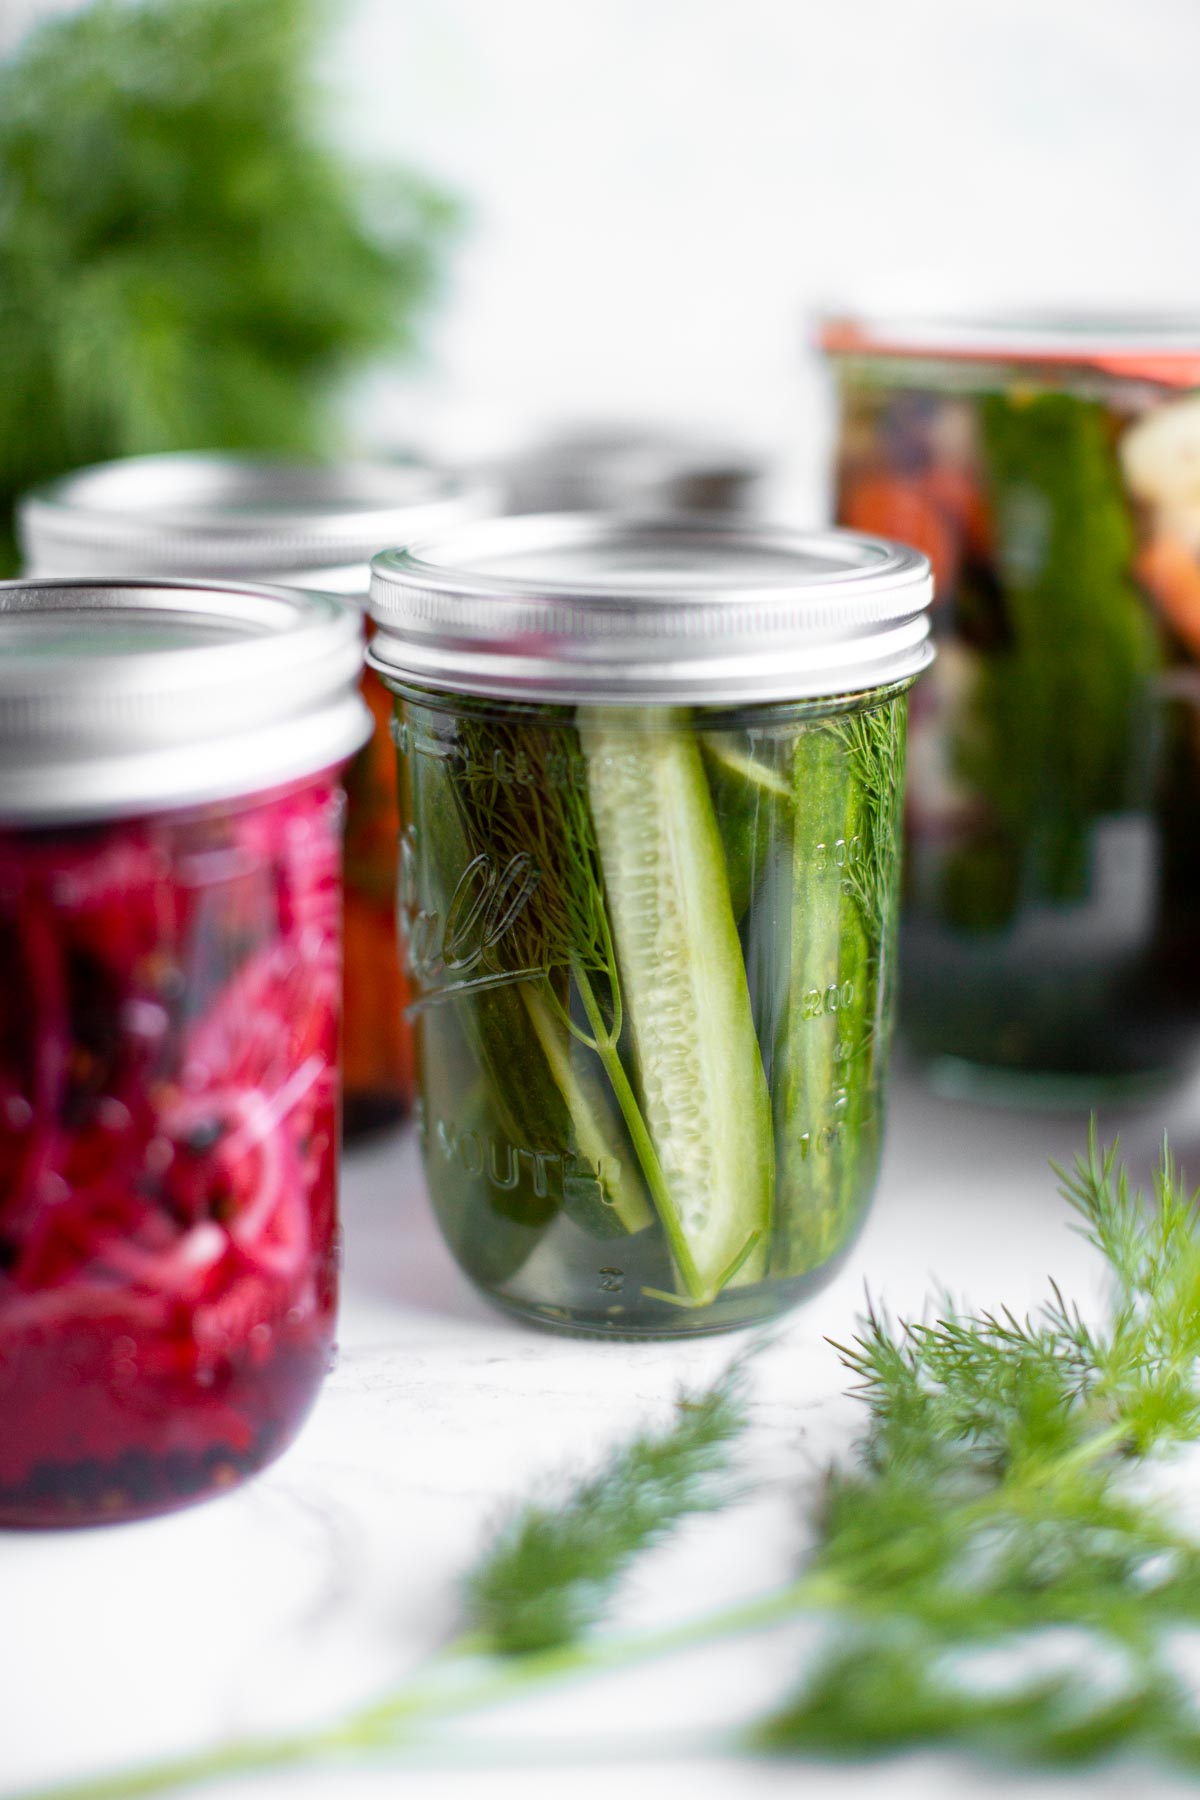 A jar of pickled cucumbers, red onions, and mixed vegetables.